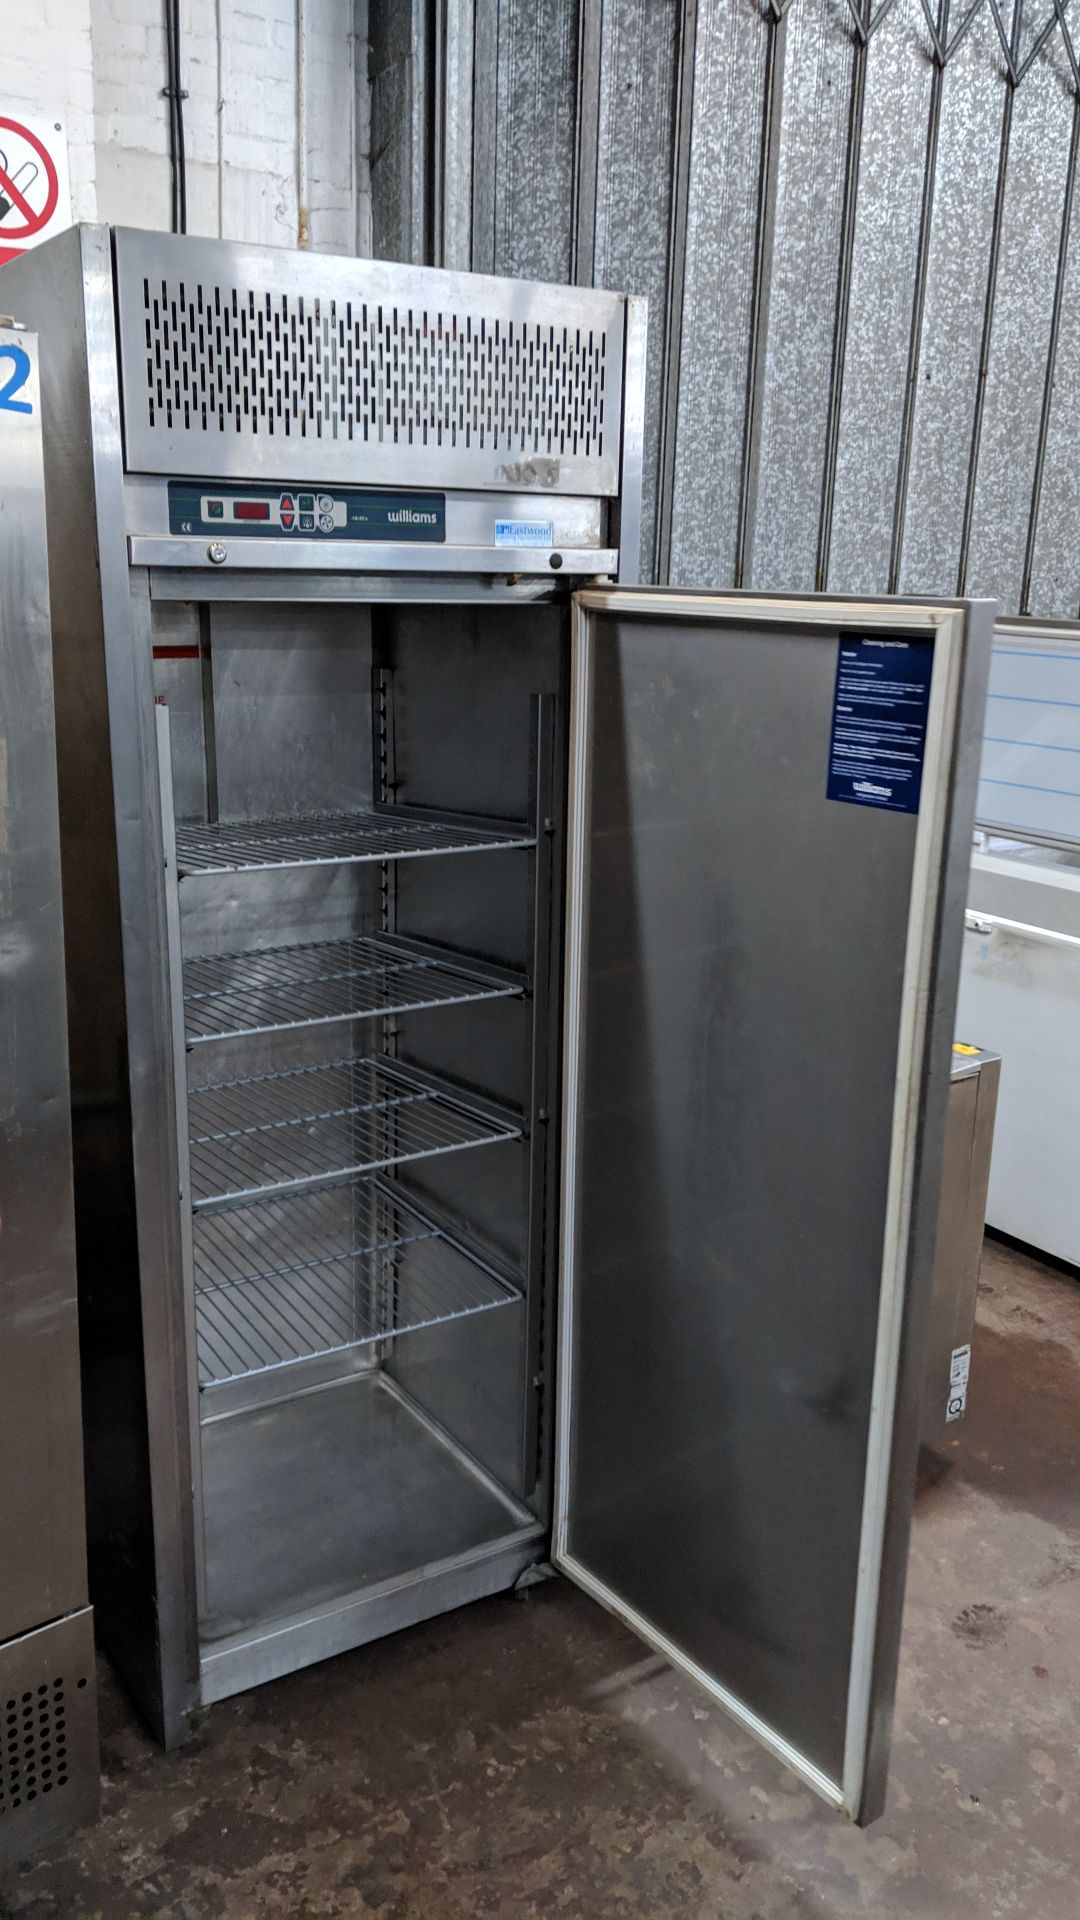 Williams stainless steel floorstanding freezer IMPORTANT: Please remember goods successfully bid - Image 4 of 4